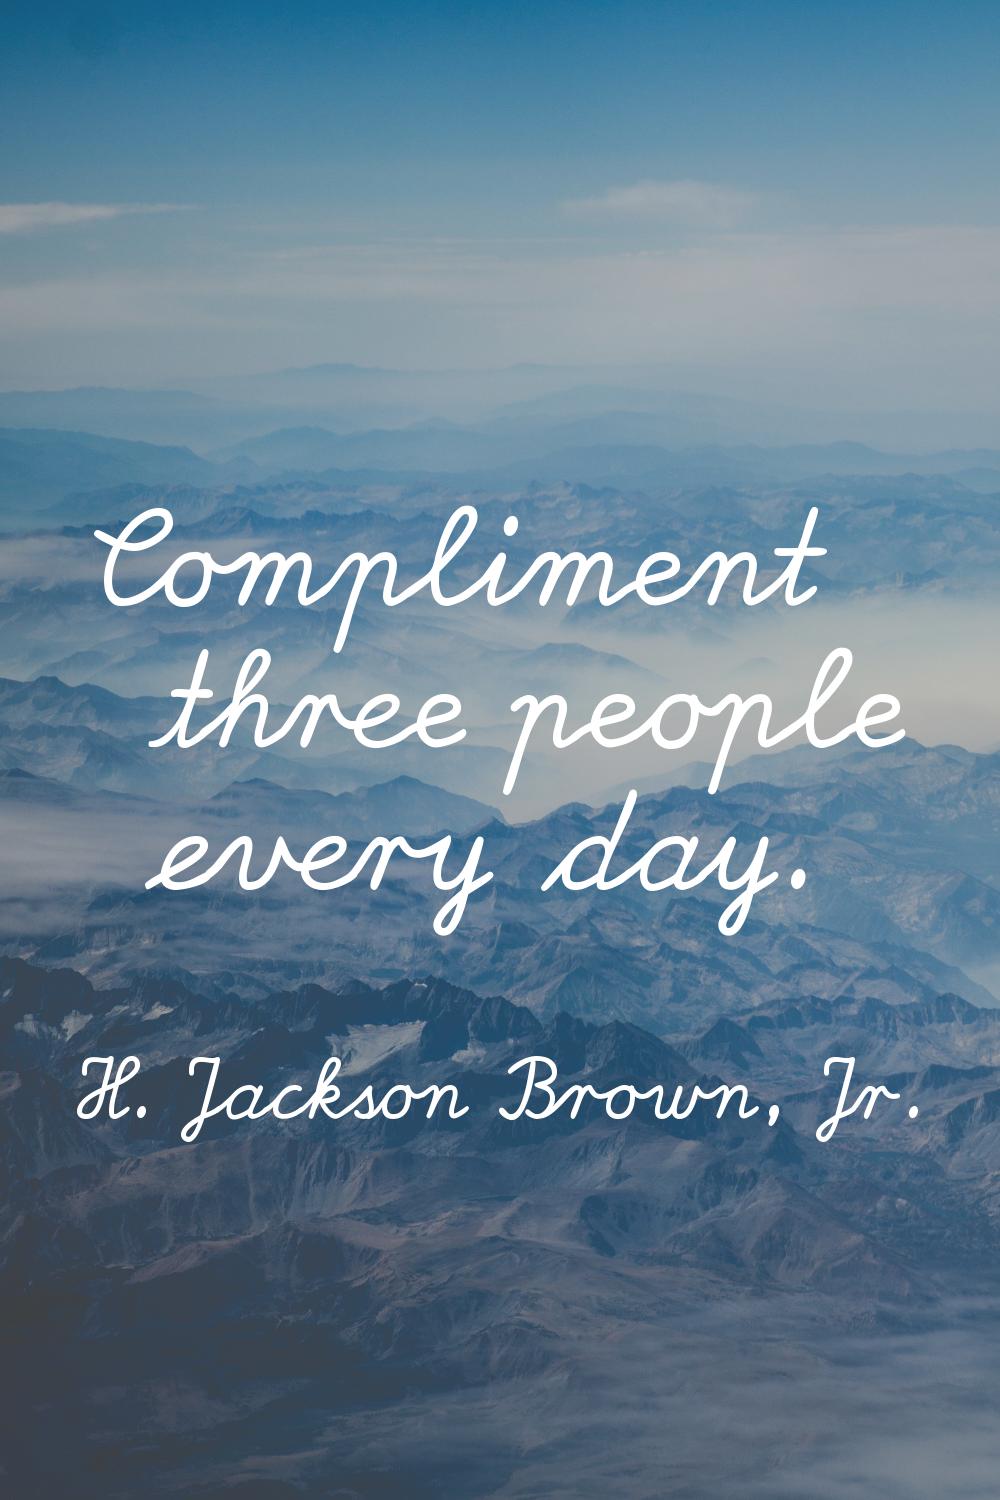 Compliment three people every day.